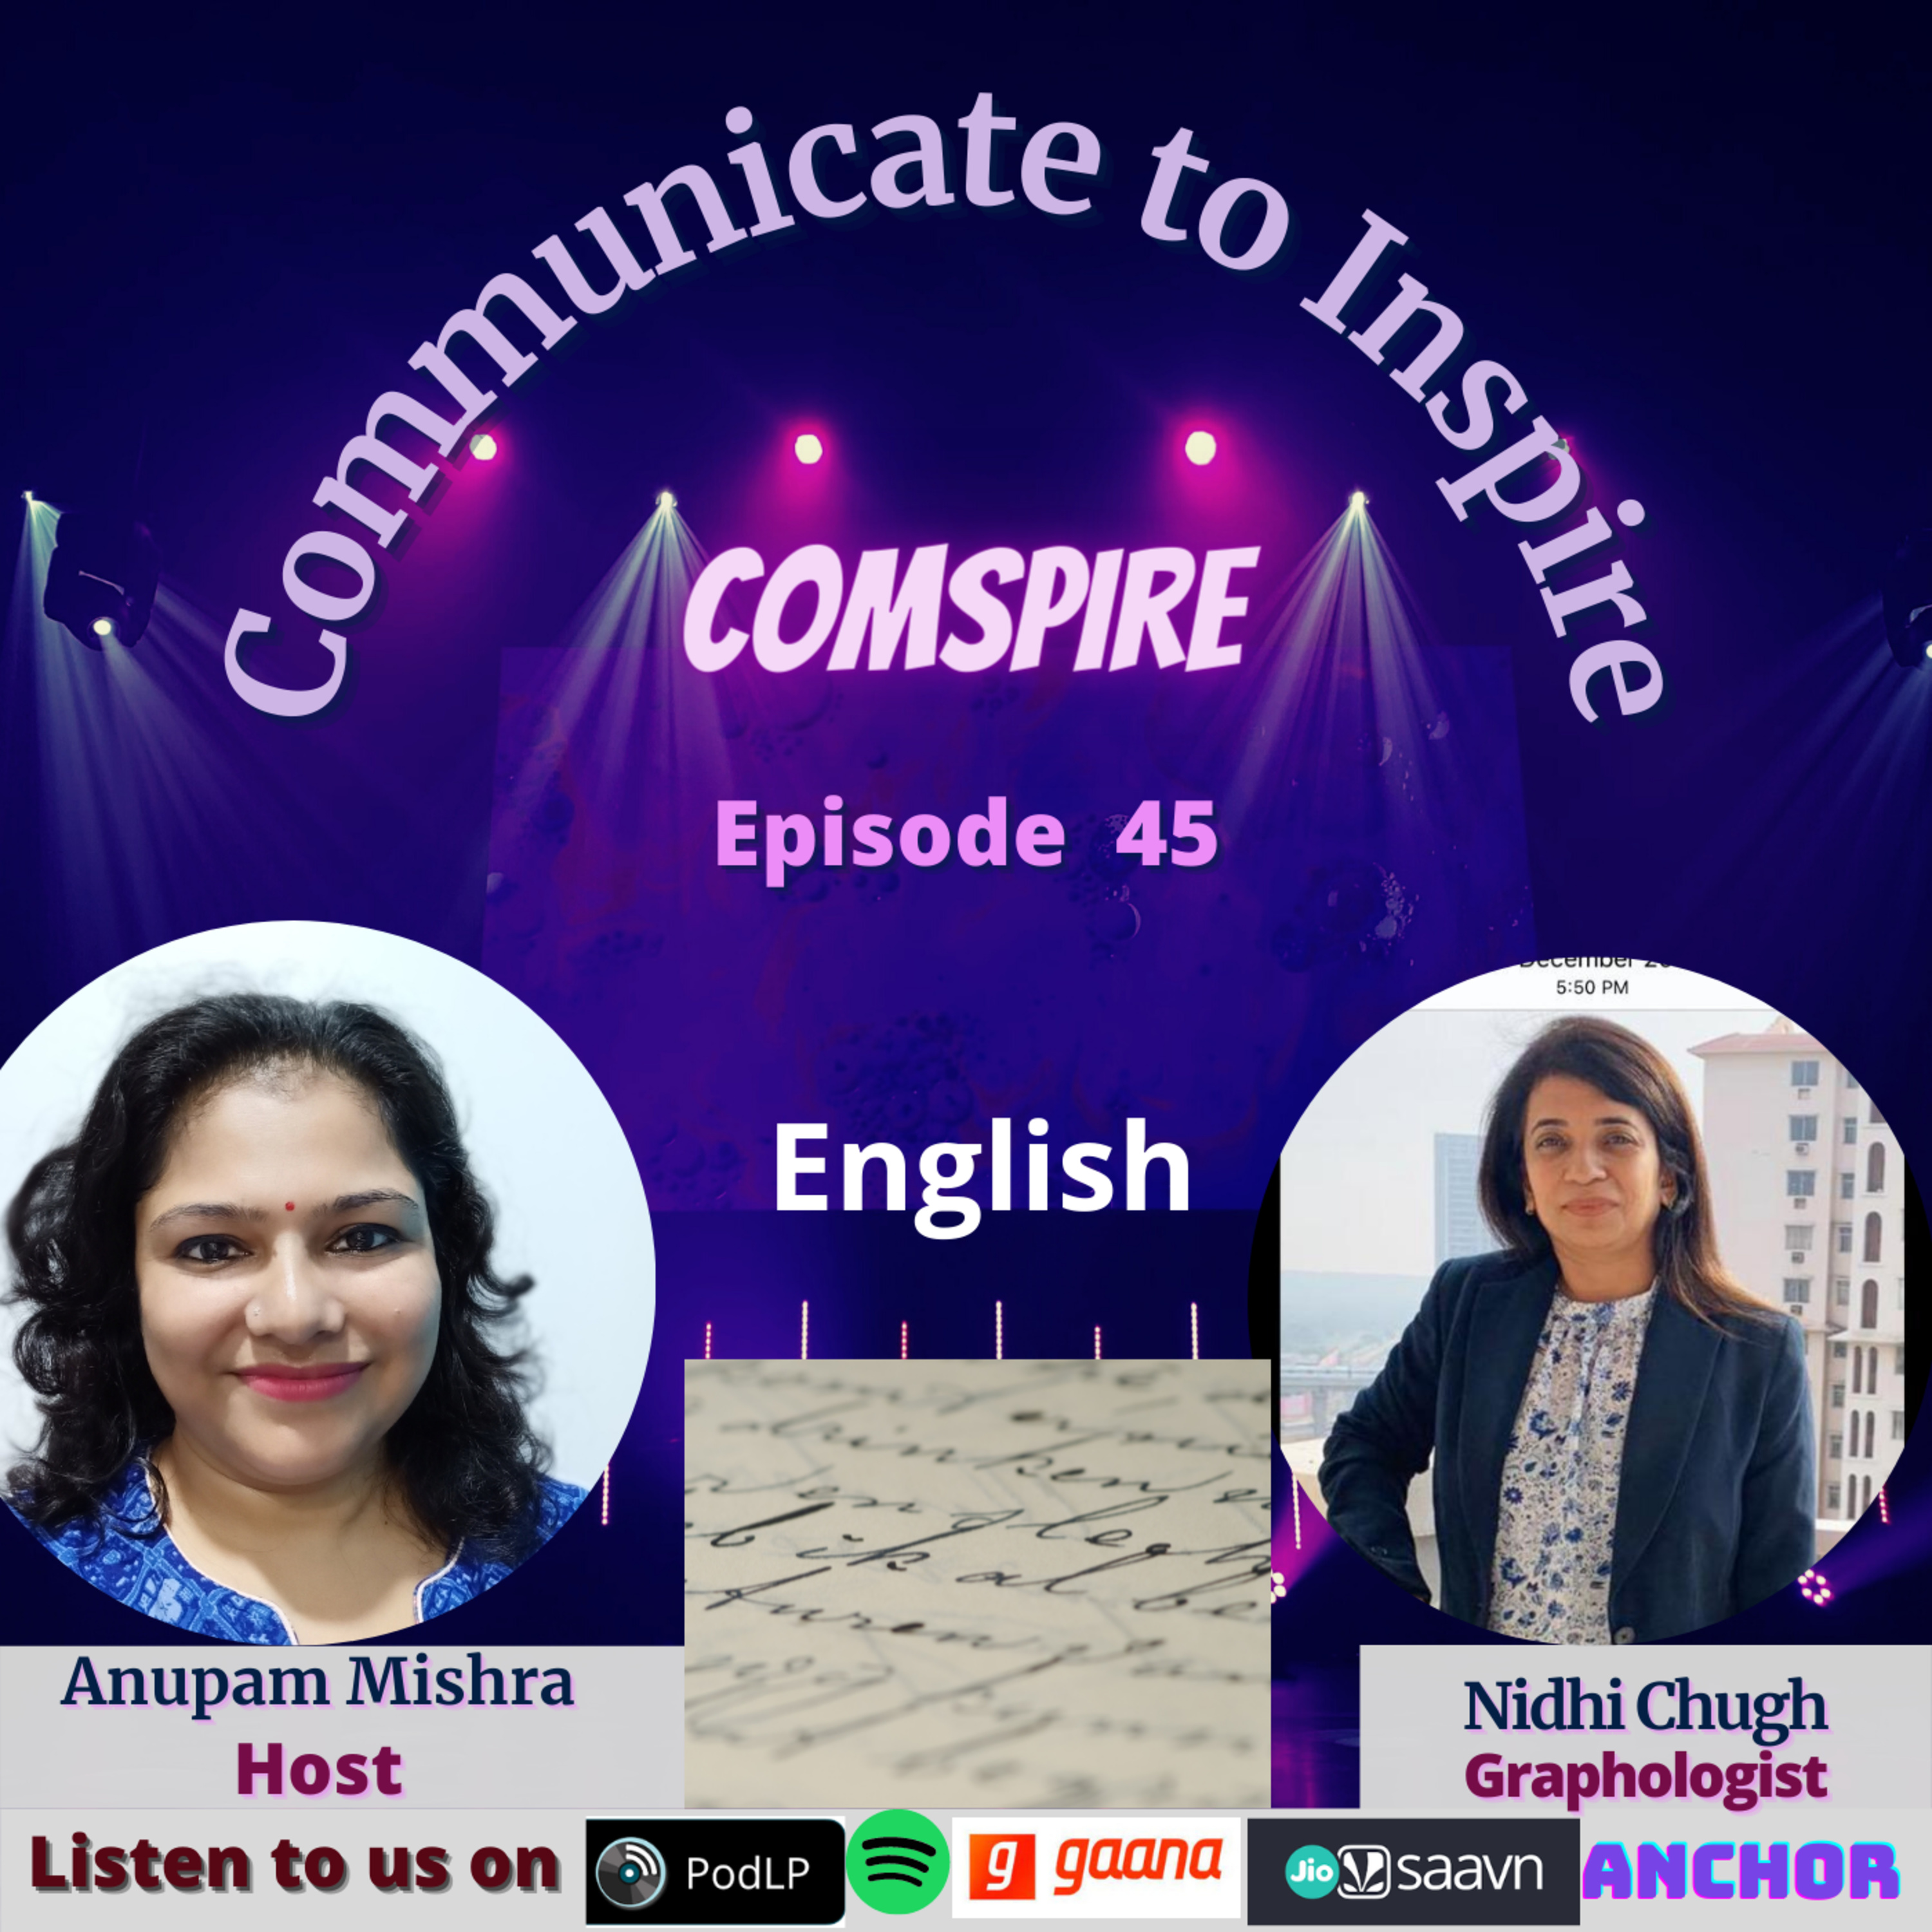 Episode 46: Story of graphologist Nidhi Chugh from a fantasy designer to Writeright trainer